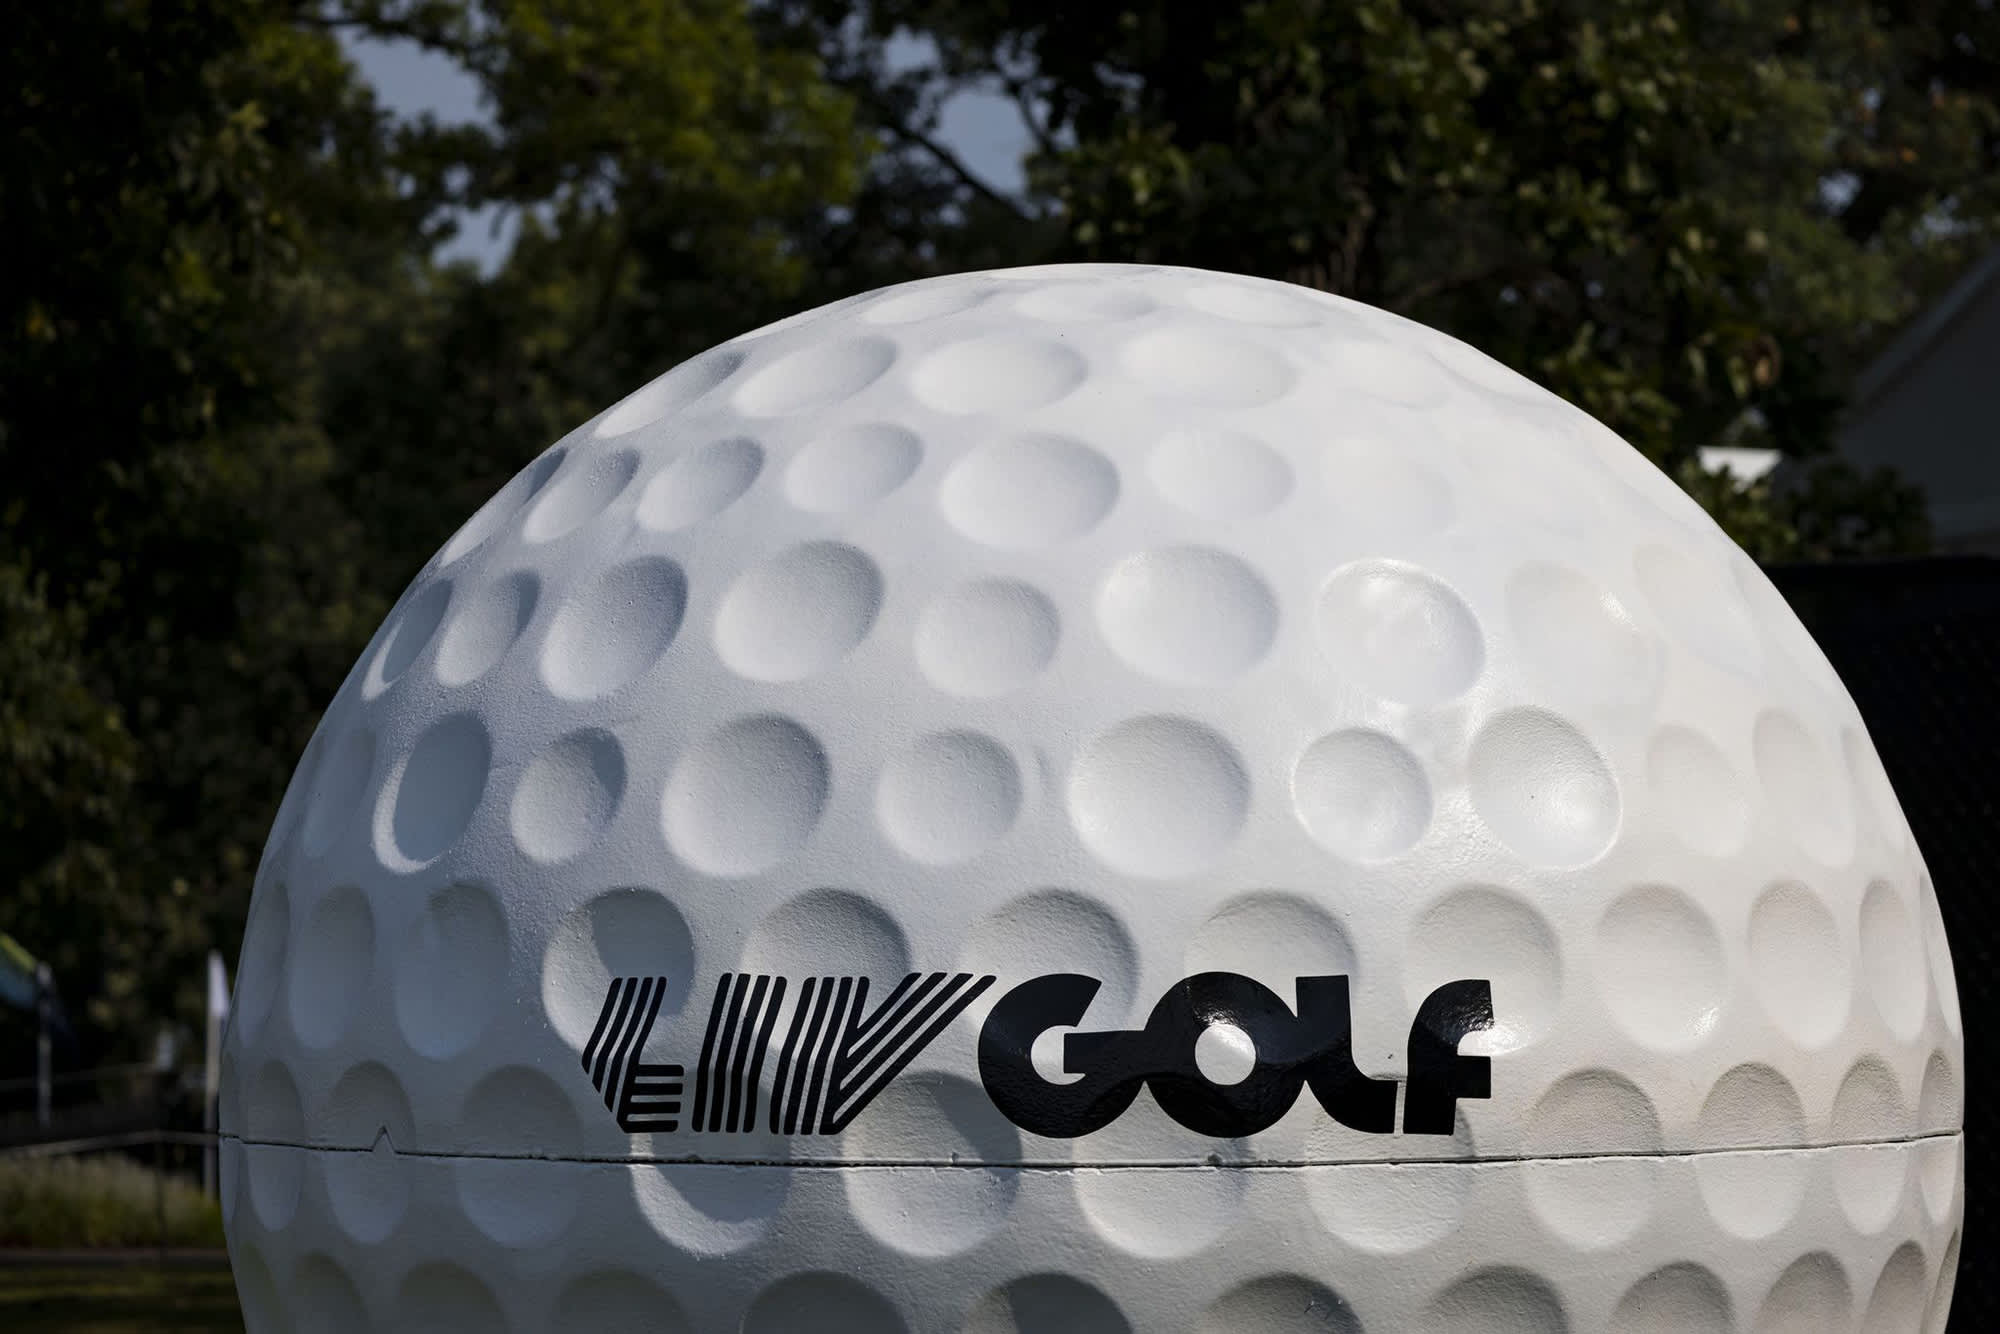 LIV Golf reaches rights deal with CW Network